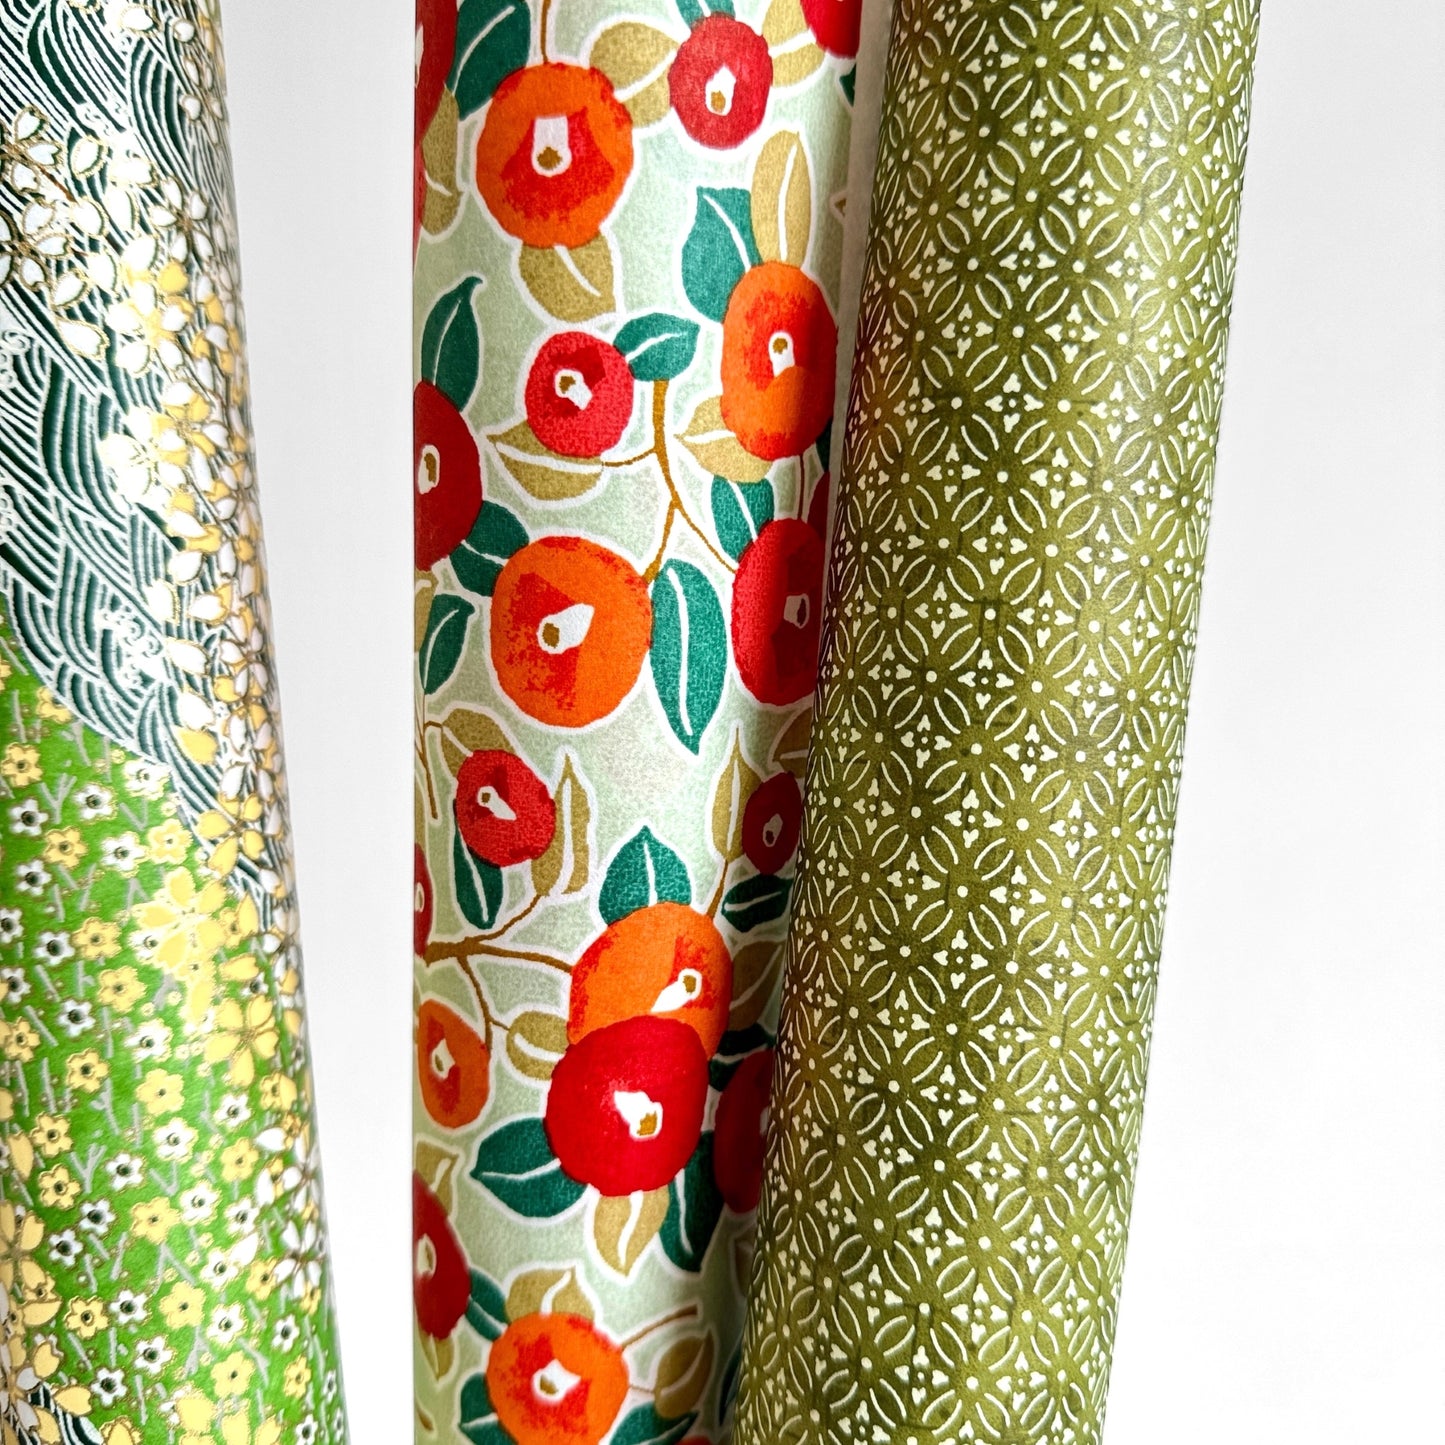 Japanese silkscreen chiyogami paper with a repeat pattern of camellia flowers in red and orange on a soft green ground. Pictured rolled with other designs